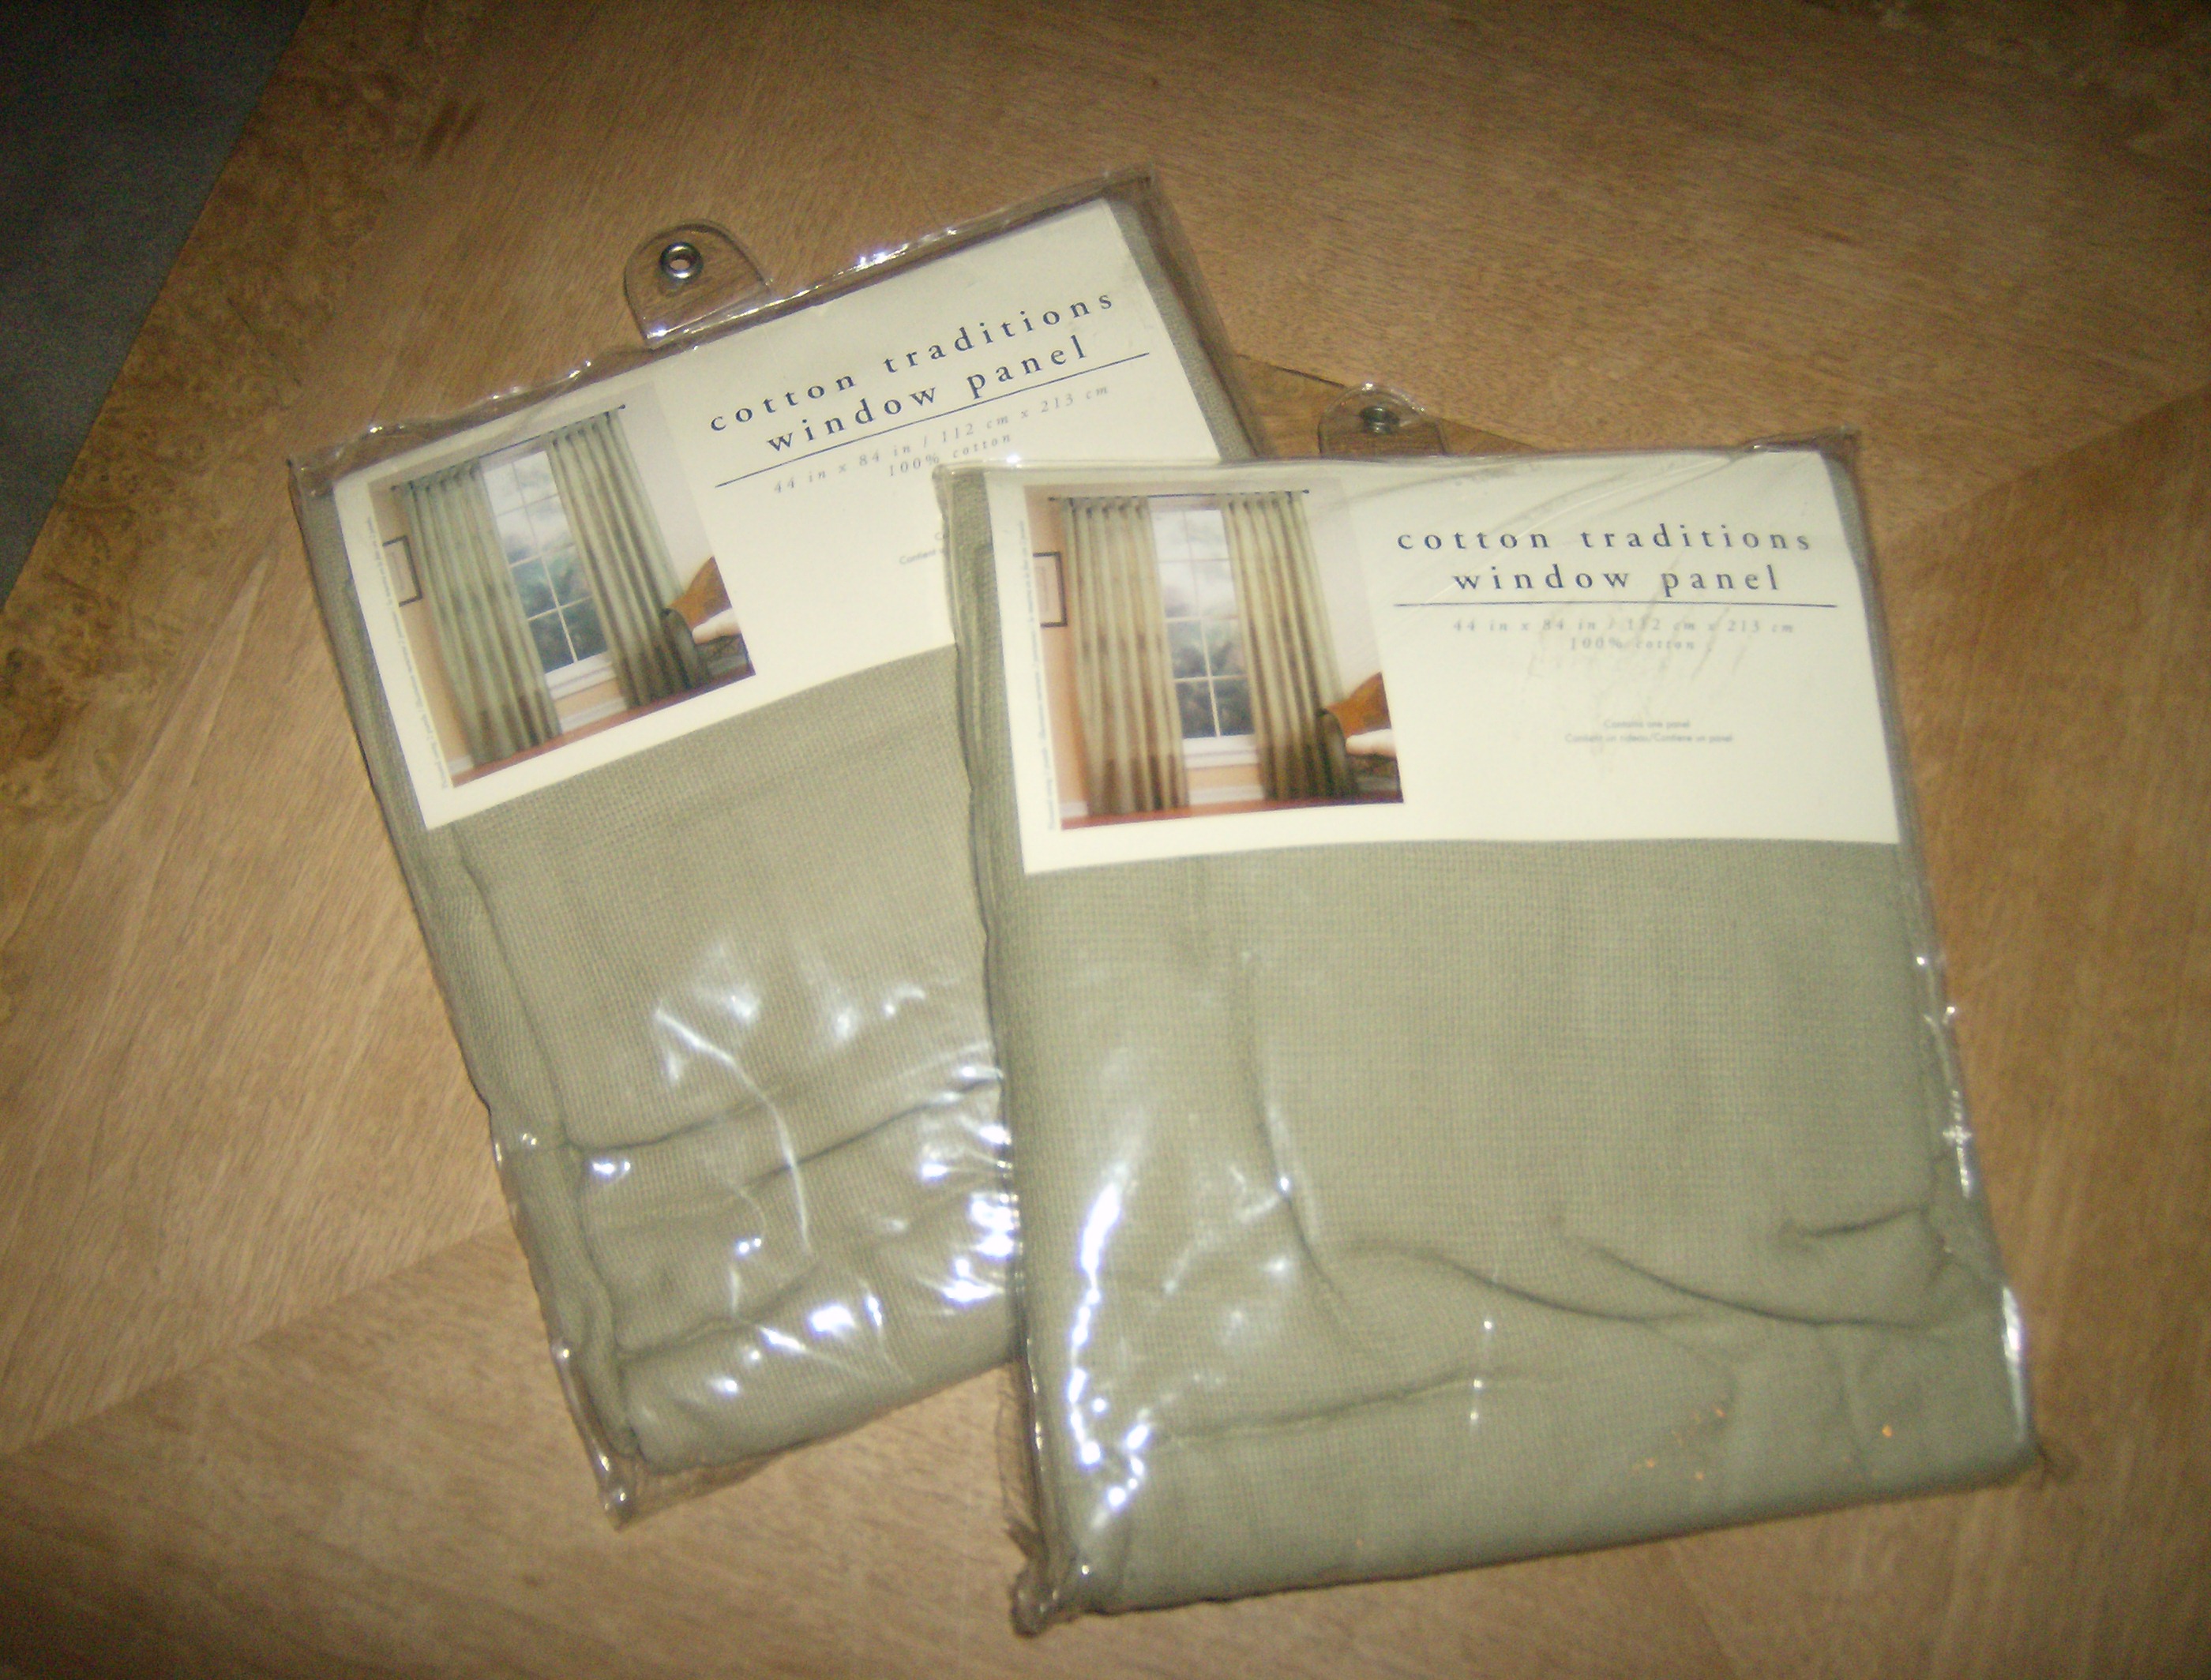 Sage Colored Window Panels - New in Package from Pier 1!